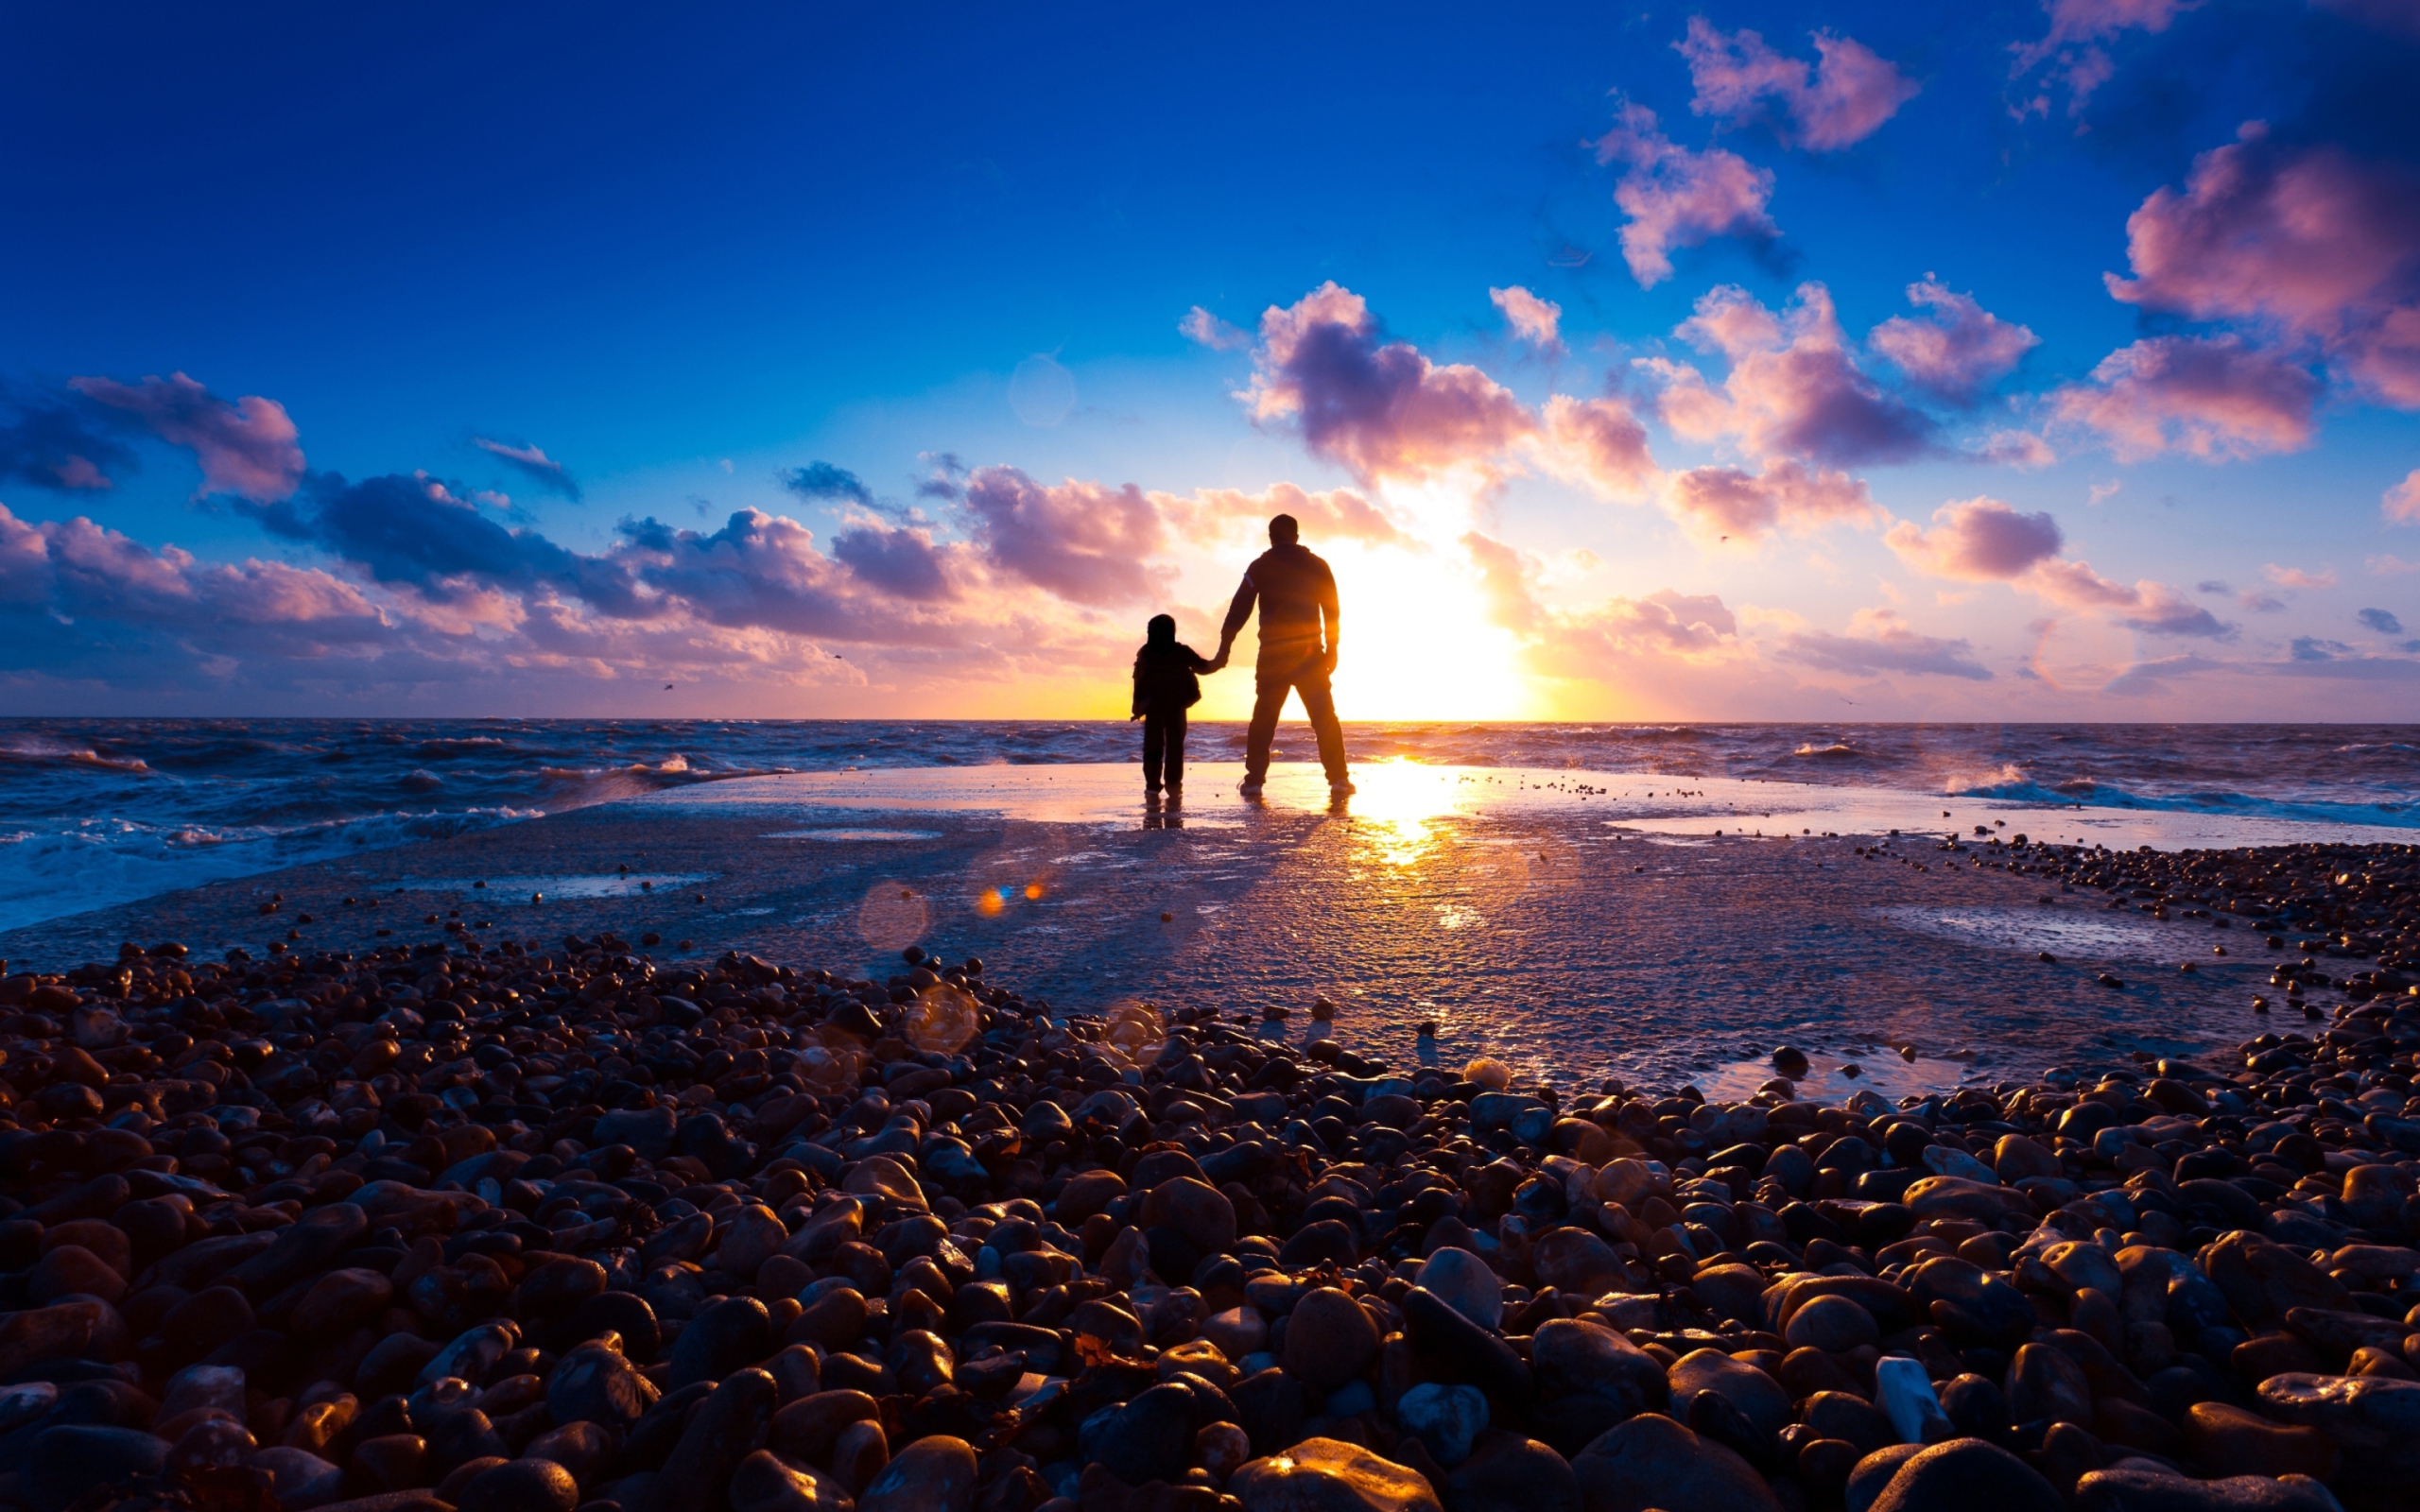 Father And Son On Beach At Sunset wallpaper 2560x1600